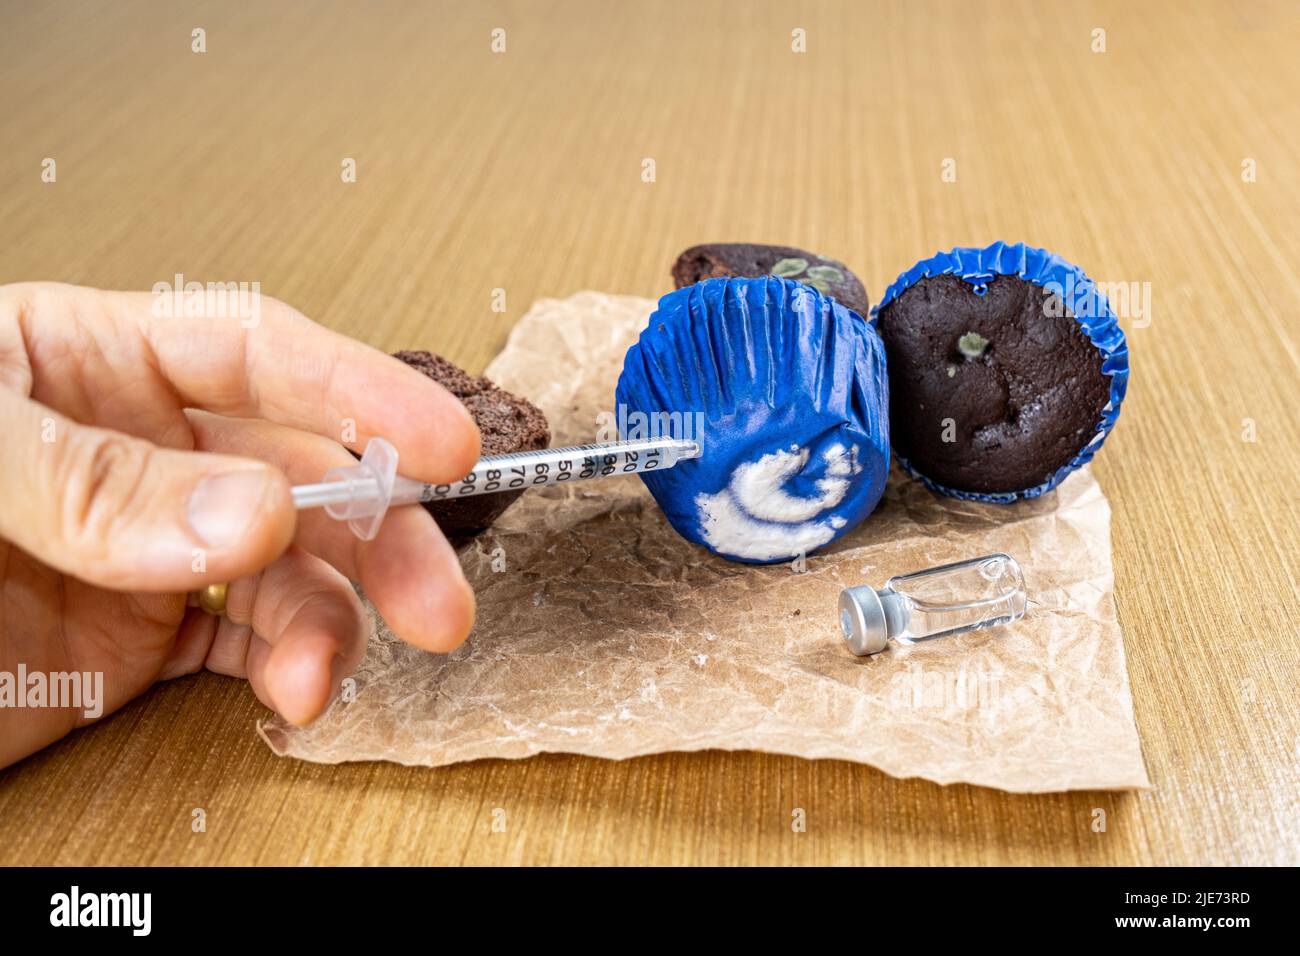 Man with syringe injecting insulin into moldy chocolate muffin side view. Stock Photo